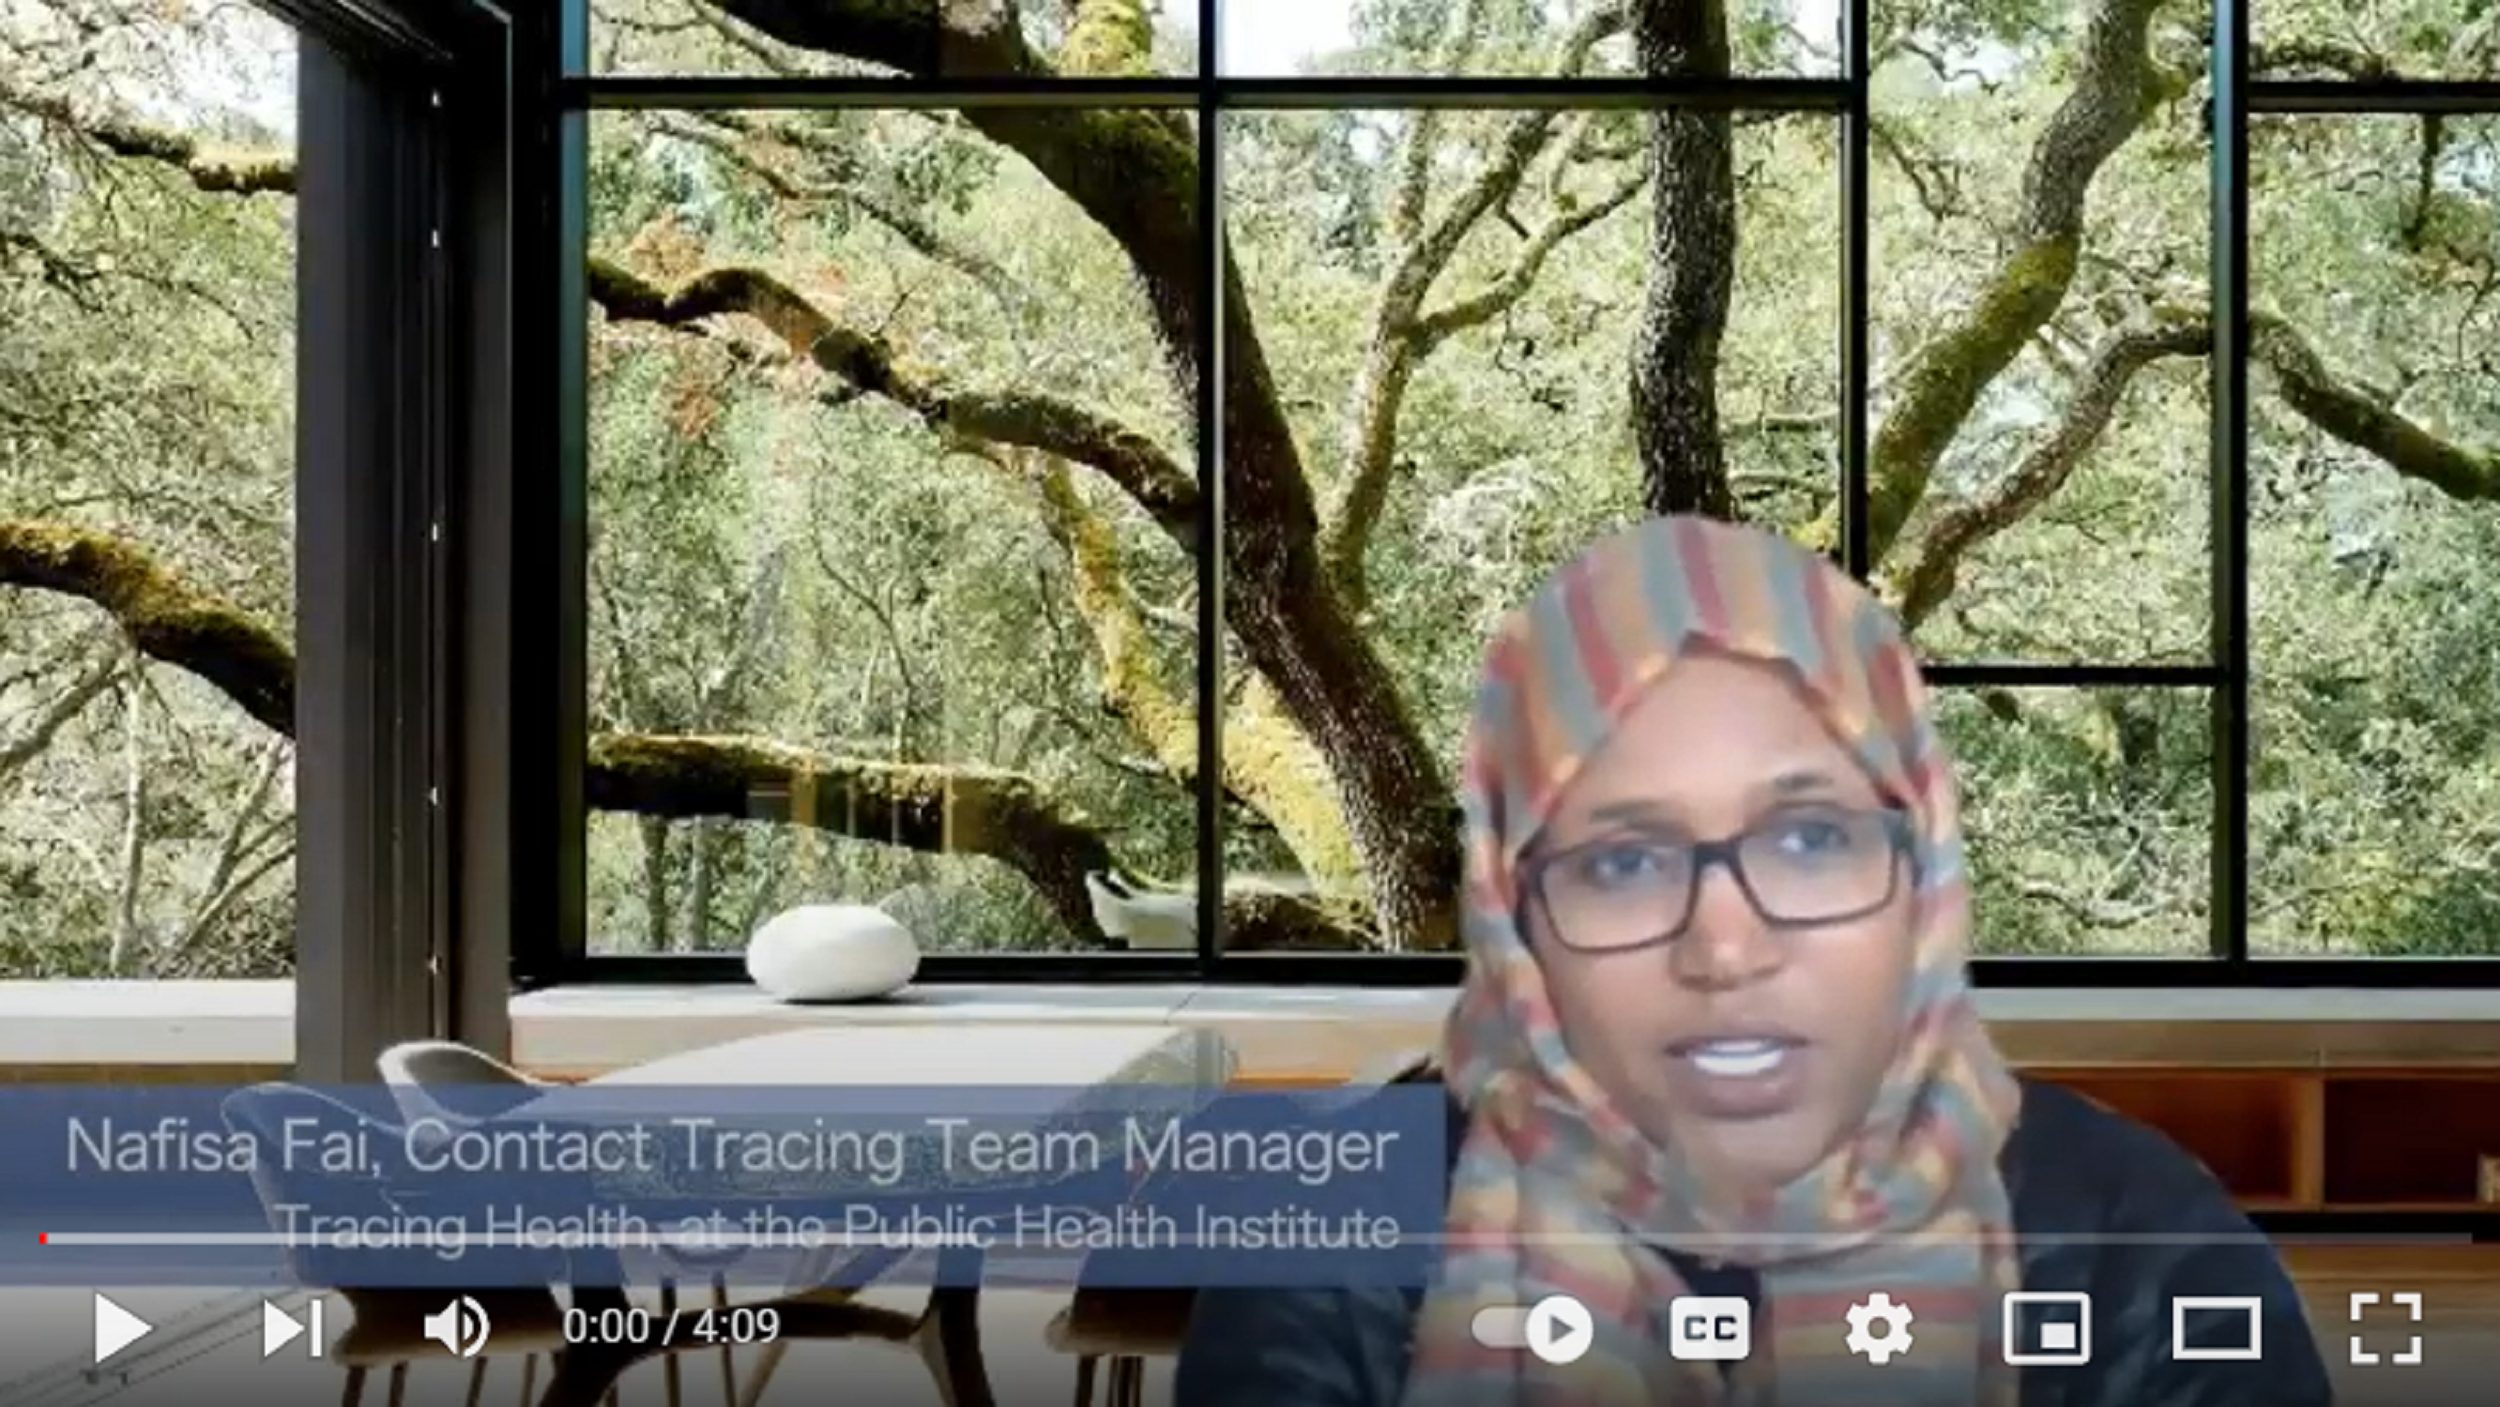 Screenshot from video: Nafisa Fai, from PHI's Tracing Health contact tracing program, discusses the real mental health impacts of COVID-19, and how PHI's contact tracers are trained to provide intervention, support and resources to those at risk.